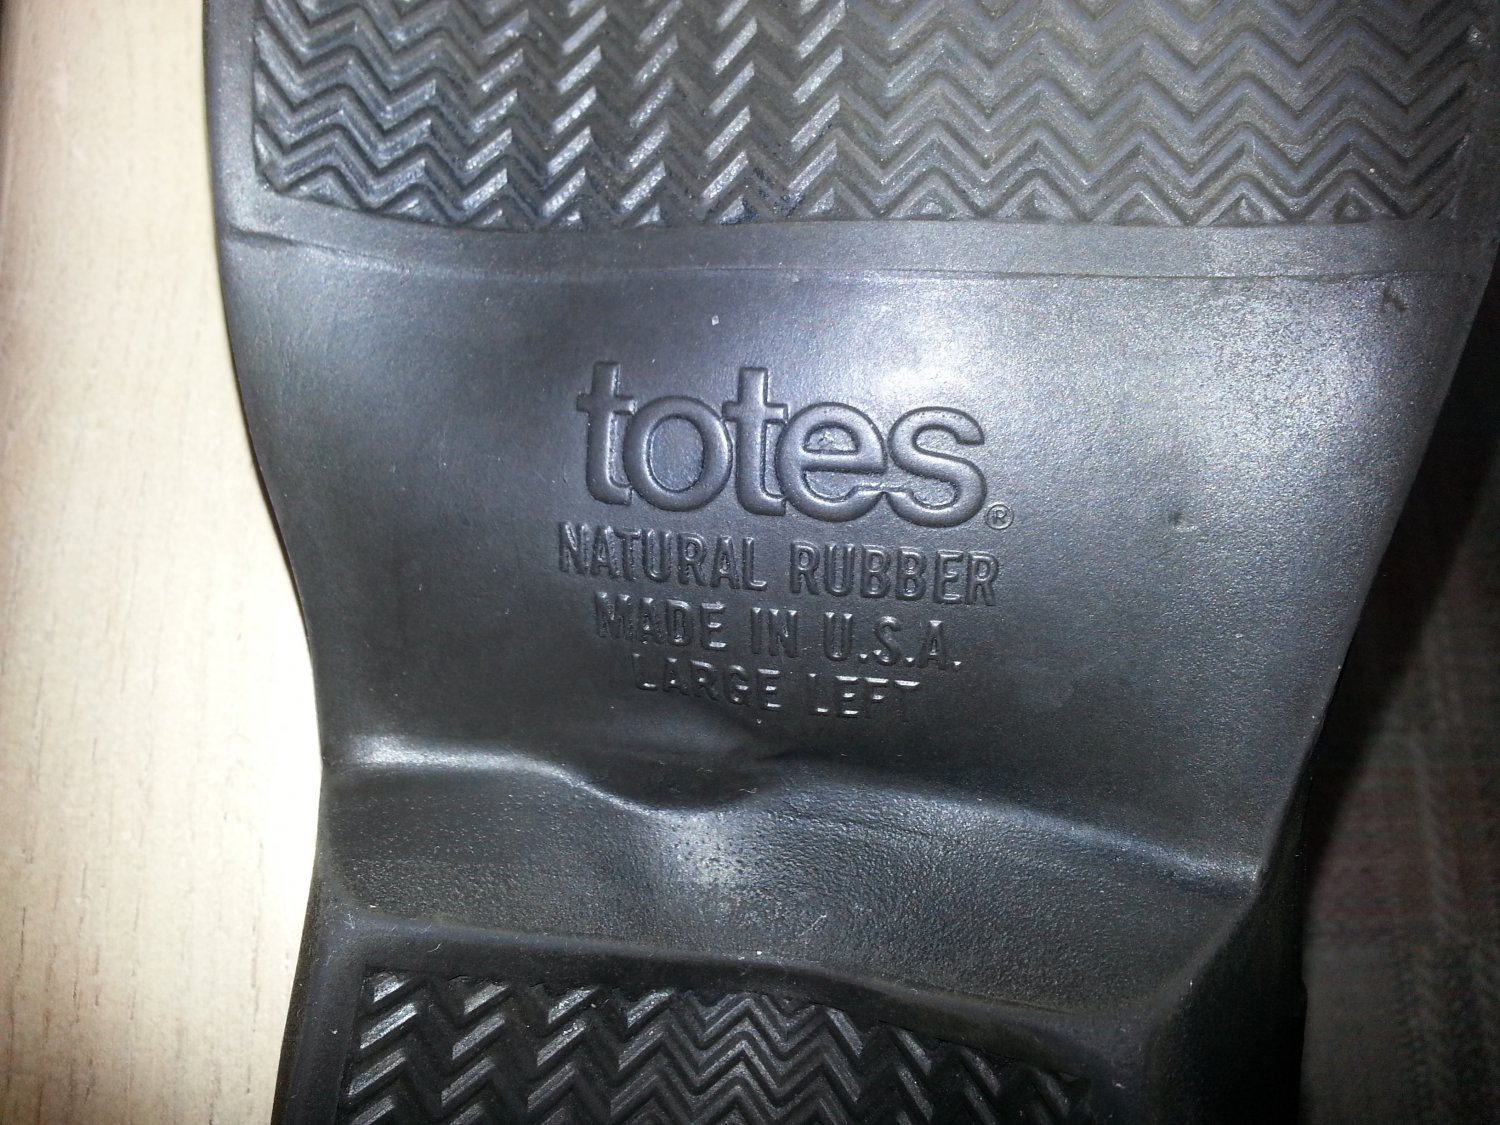 Vintage Totes Town Boots - 100% Rubber Overshoes - Size Large - Protect ...